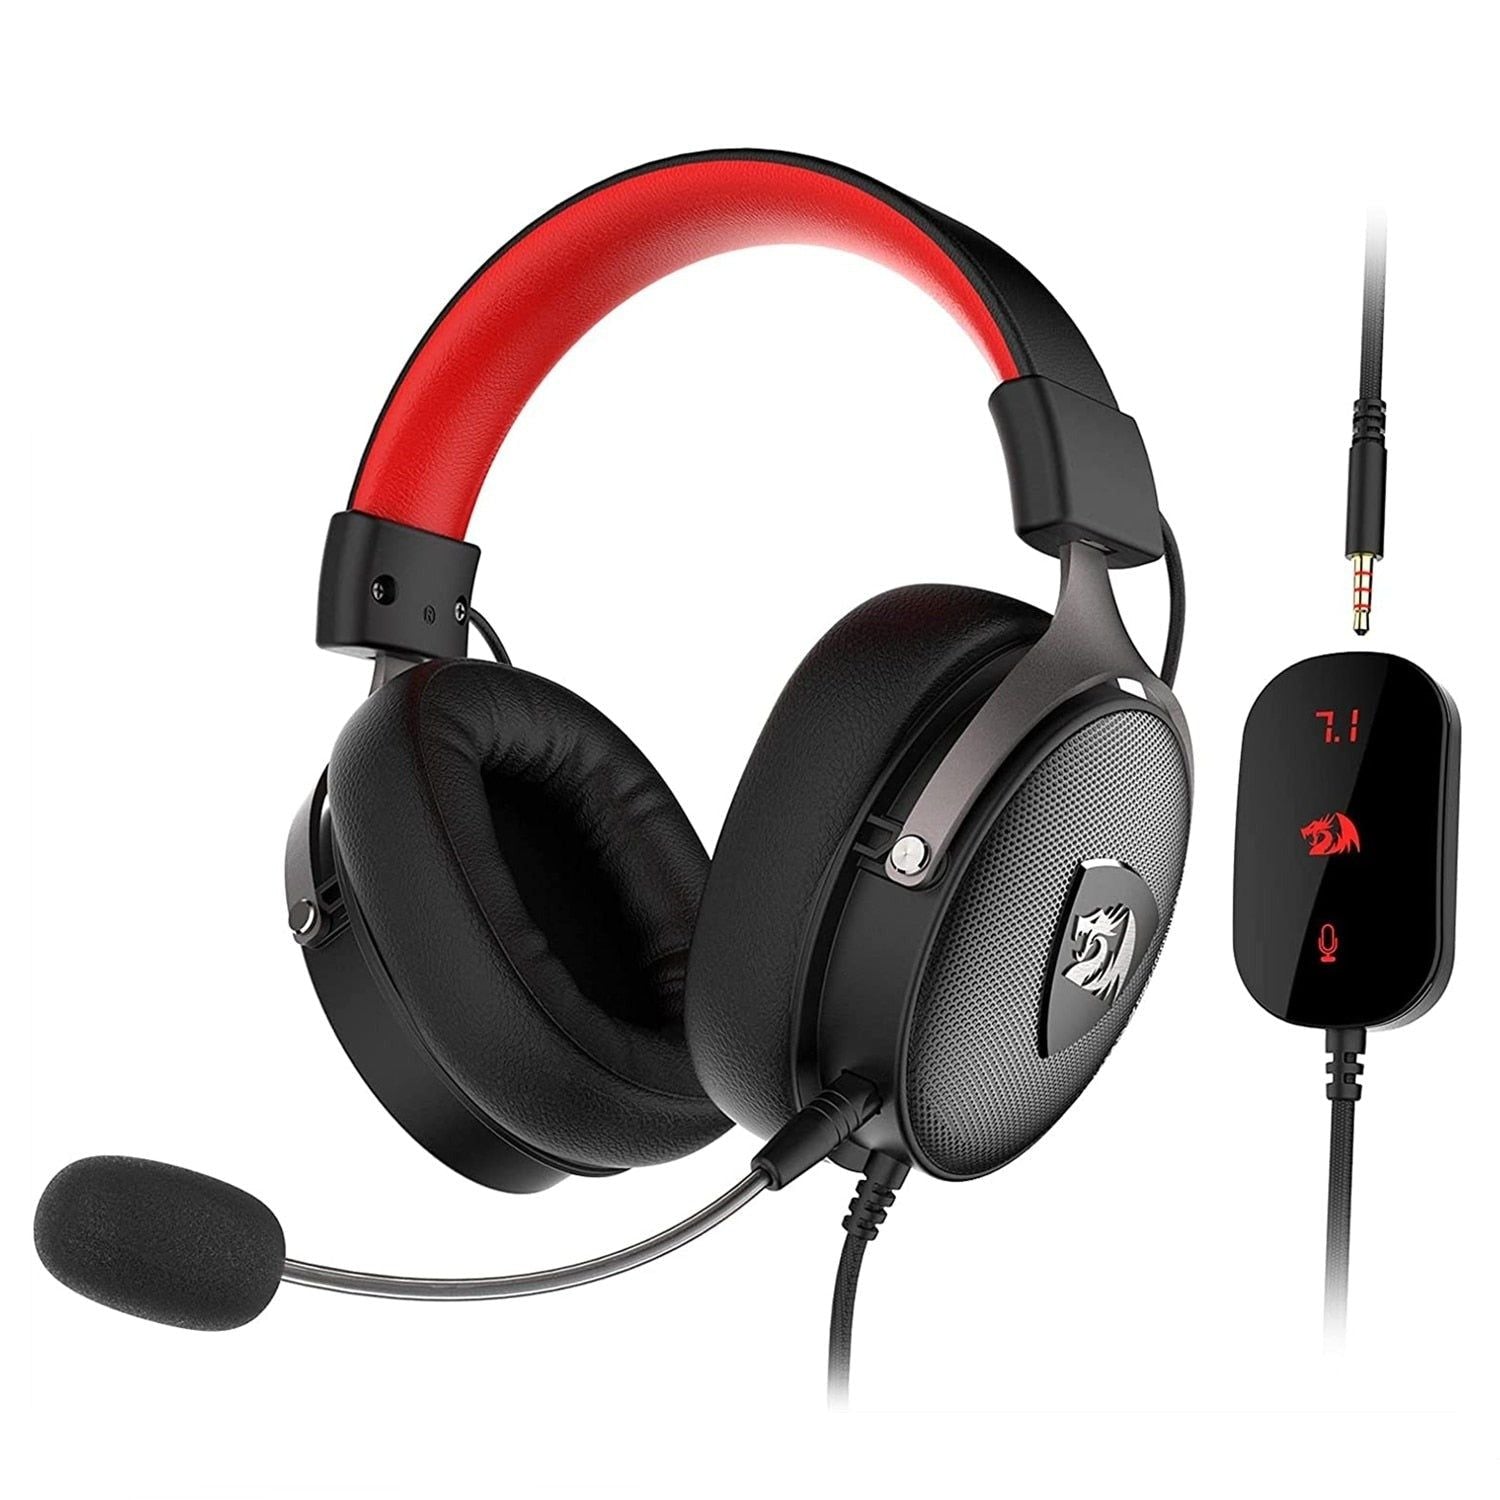 H520 Gaming Headset With Noise Cancelling And 7.1 Surround Sound For PC/PS4/Xbox One/Phone | Hifi Media Store